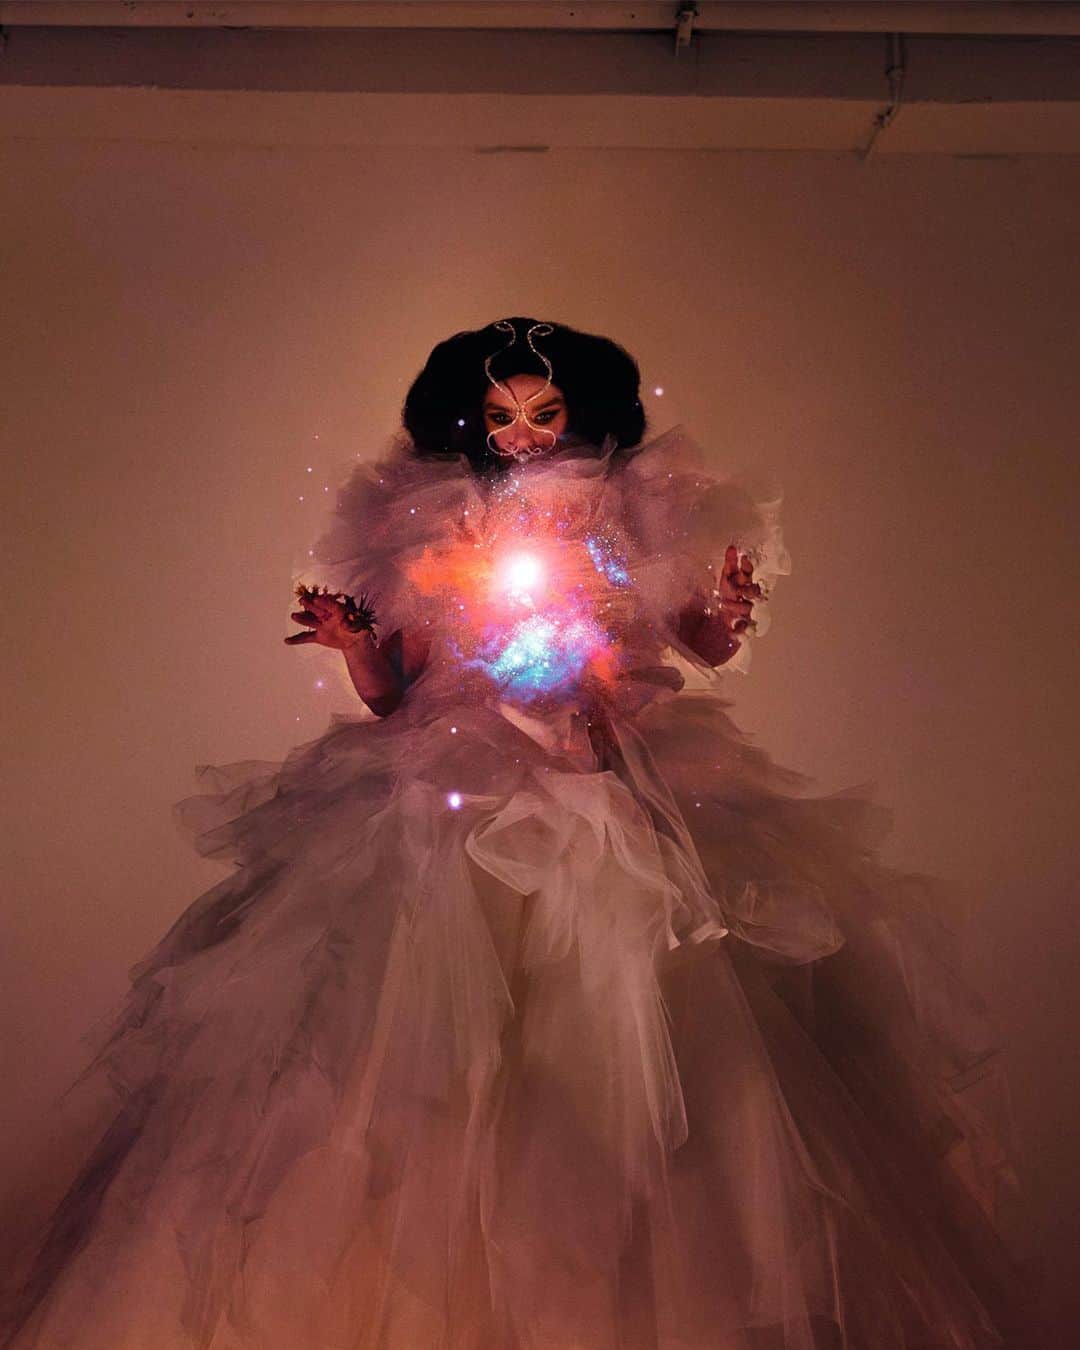 i-Dさんのインスタグラム写真 - (i-DInstagram)「Björk and Arca’s relationship has naturally evolved, it seems, from one of a maternal figure and her protege to that of equals, of sisters.⁣⁣ ⁣⁣ @bjork has described their finding of one another as the strongest musical relationship she’s had. ⁣⁣ ⁣ @arca1000000 describes it as “layered in its depth and multiplicity; simple, messy, transcendental, joyous, beguiling, sisterly, snakelike, emotional, tender, meaningful and mysterious”.⁣⁣ ⁣⁣⁣ Hit the link in bio to see Arca and Björk’s beautiful cover story and read the intimate letters they wrote to one another for i-D’s 40th Anniversary Issue.⁣⁣ ⁣⁣ On sale now at www.i-dstore.co⁣⁣⁣ 🛒⁣⁣⁣⁣⁣⁣⁣⁣⁣ ⁣⁣⁣⁣⁣⁣⁣⁣⁣ [The 40th Anniversary Issue, No. 361, Autumn 2020]⁣⁣⁣⁣⁣⁣⁣⁣⁣⁣⁣⁣⁣⁣⁣ ⁣⁣ Handwriting by Futura 20000 @futuradosmil⁣⁣  .⁣⁣ .⁣⁣ .⁣⁣ Text @frankie__dunn⁣⁣ Photography @mertalas & @macpiggott⁣⁣ Styling (Arca) @aikamoshita⁣⁣ Styling (Björk) @eddagud⁣⁣ Editor in Chief and Creative Director @alastairmckimm⁣⁣⁠⁣⁣ Creative Direction, Art Direction and Editorial Design @LauraGenninger @Studio191ny⁣⁣ Hair and make-up (Arca) @mr.davidlopez at Esther Almansa using Fenty beauty.⁣⁣ Hair (Björk) @katasif using KEVIN.MURPHY.⁣⁣ Make-up (Björk) @sunnabjorkmakeup using Pat Mcgrath Labs Mothership VI. ⁣⁣ Nail technician (Björk) Lyn Nguyen.⁣⁣ Executive Production by Leonard Cuinet at April Production.⁣⁣ Production (Arca) Mamma Team. ⁣⁣ Production (Bjork) Vidar Logi.⁣⁣ Casting director @samuel_ellis for DMCASTING. ⁣⁣ Björk wears Dress @maisonvalentino Haute Couture. Nosepiece  @james.t.merry. Necklace @schiaparelli. Rings @_staskauskas. 3D Nails @eichimatsunaga and @tomonyan55.⁣⁣ Arca wears Dress @stephanieuhart⁣⁣ #Legacy #Bjork #Arca」10月20日 21時25分 - i_d